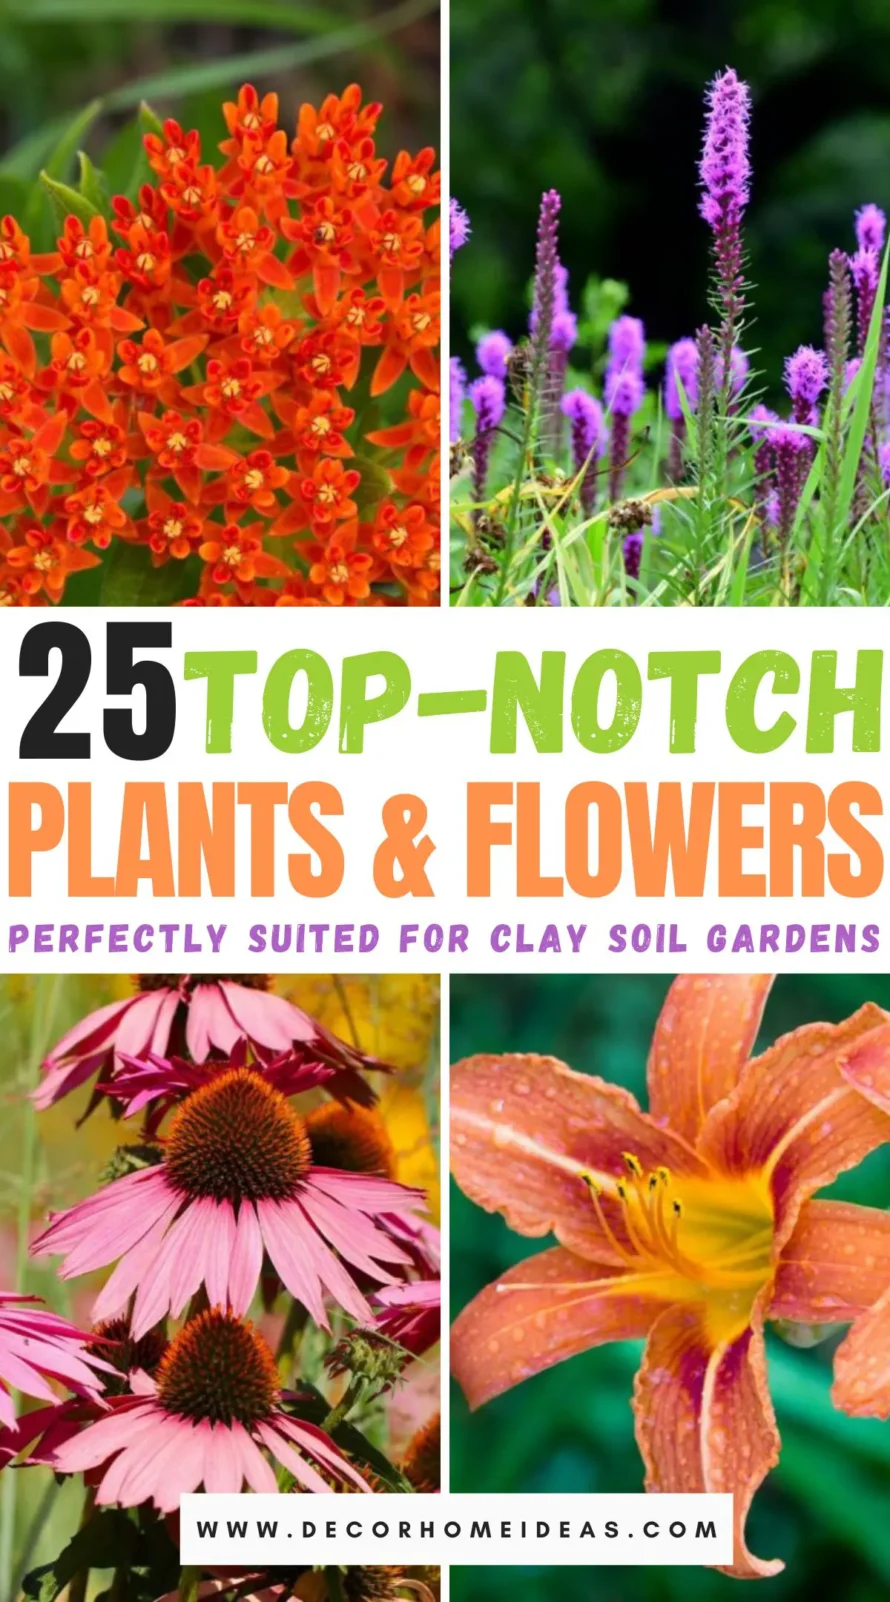 Discover 25 resilient plants that thrive in clay soil, transforming challenging garden conditions into a lush, vibrant landscape. Learn which species excel in dense soil and how to cultivate them for optimal growth. 